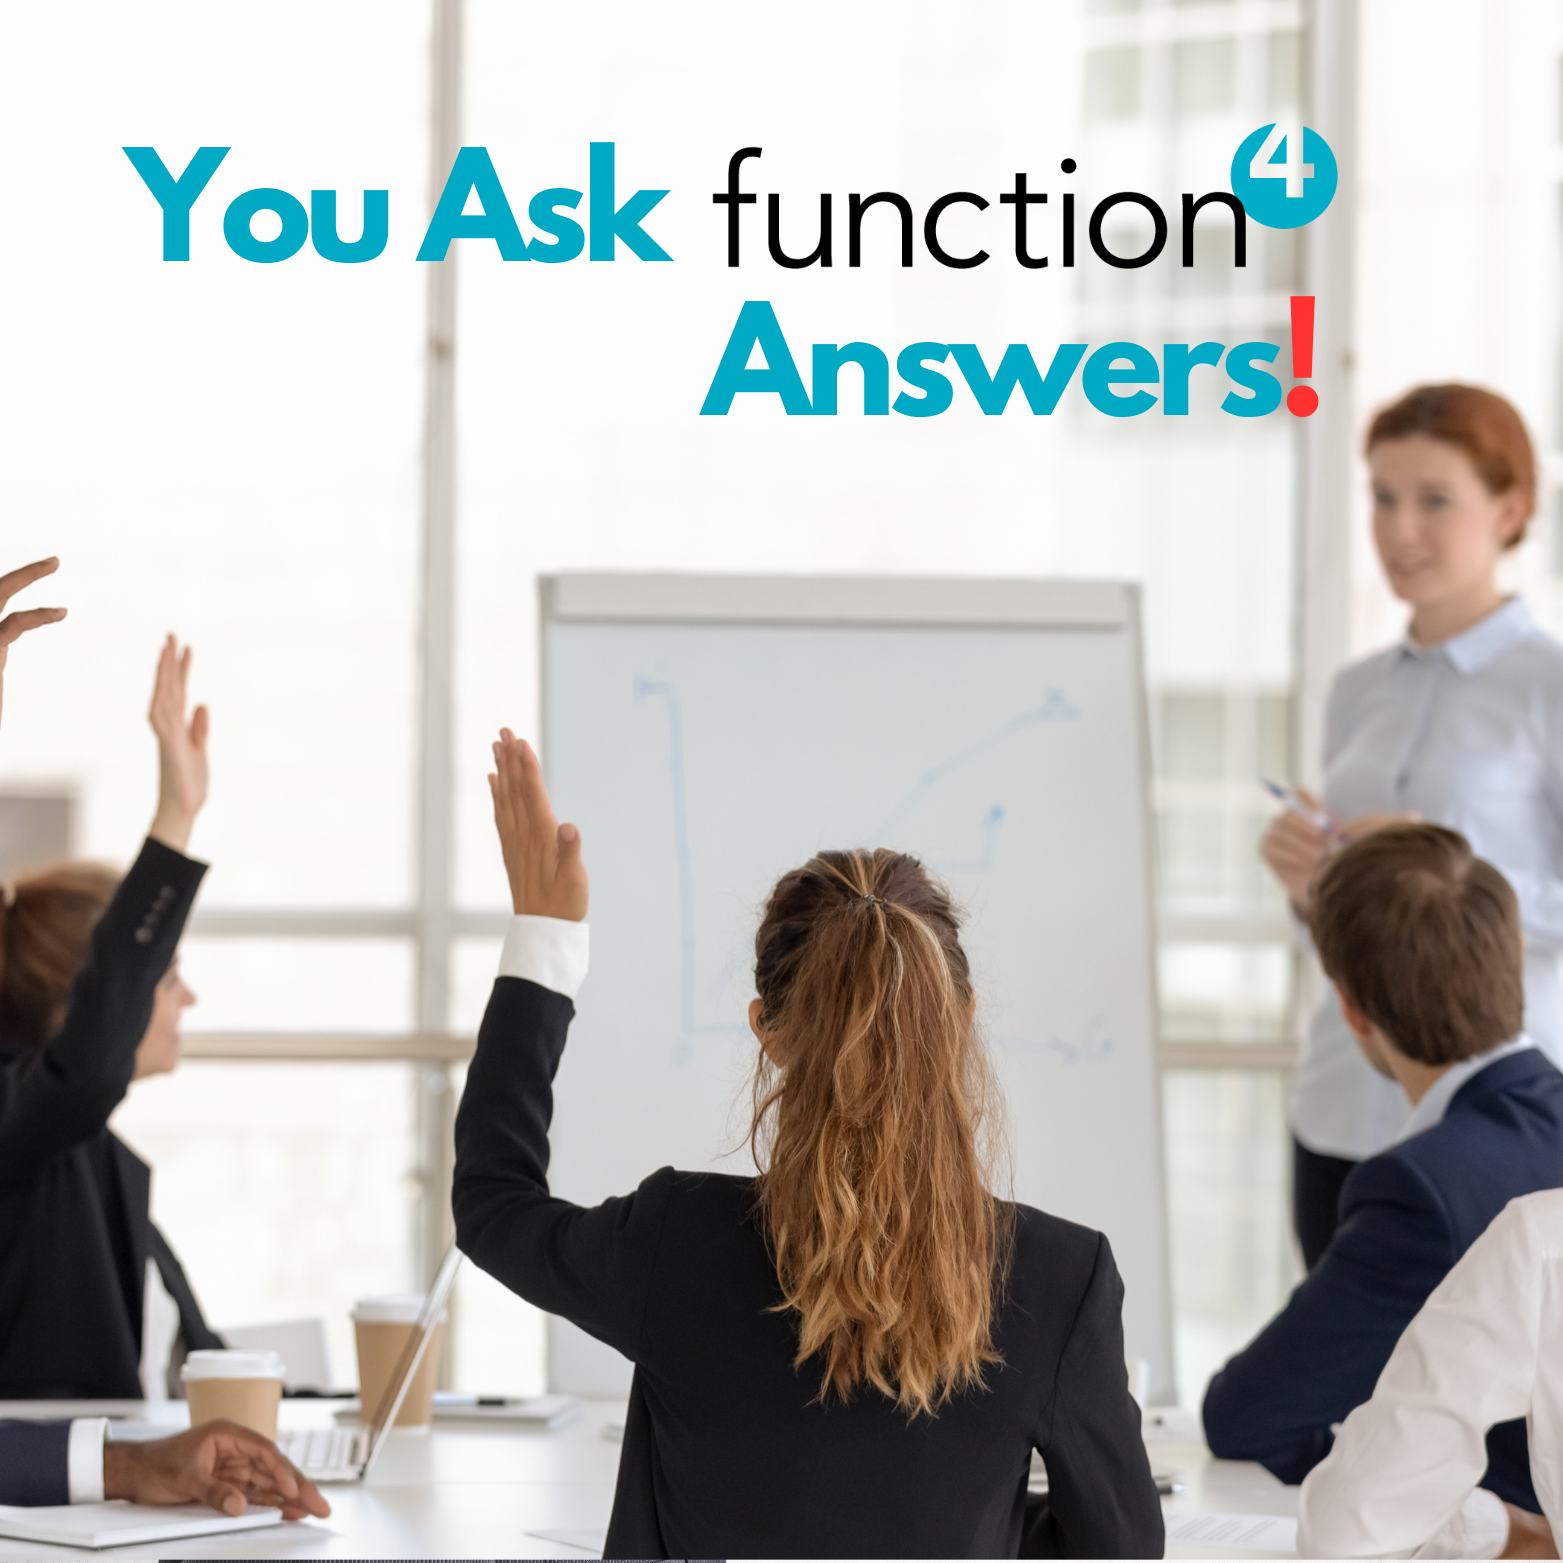 You Ask Function-4 Answers